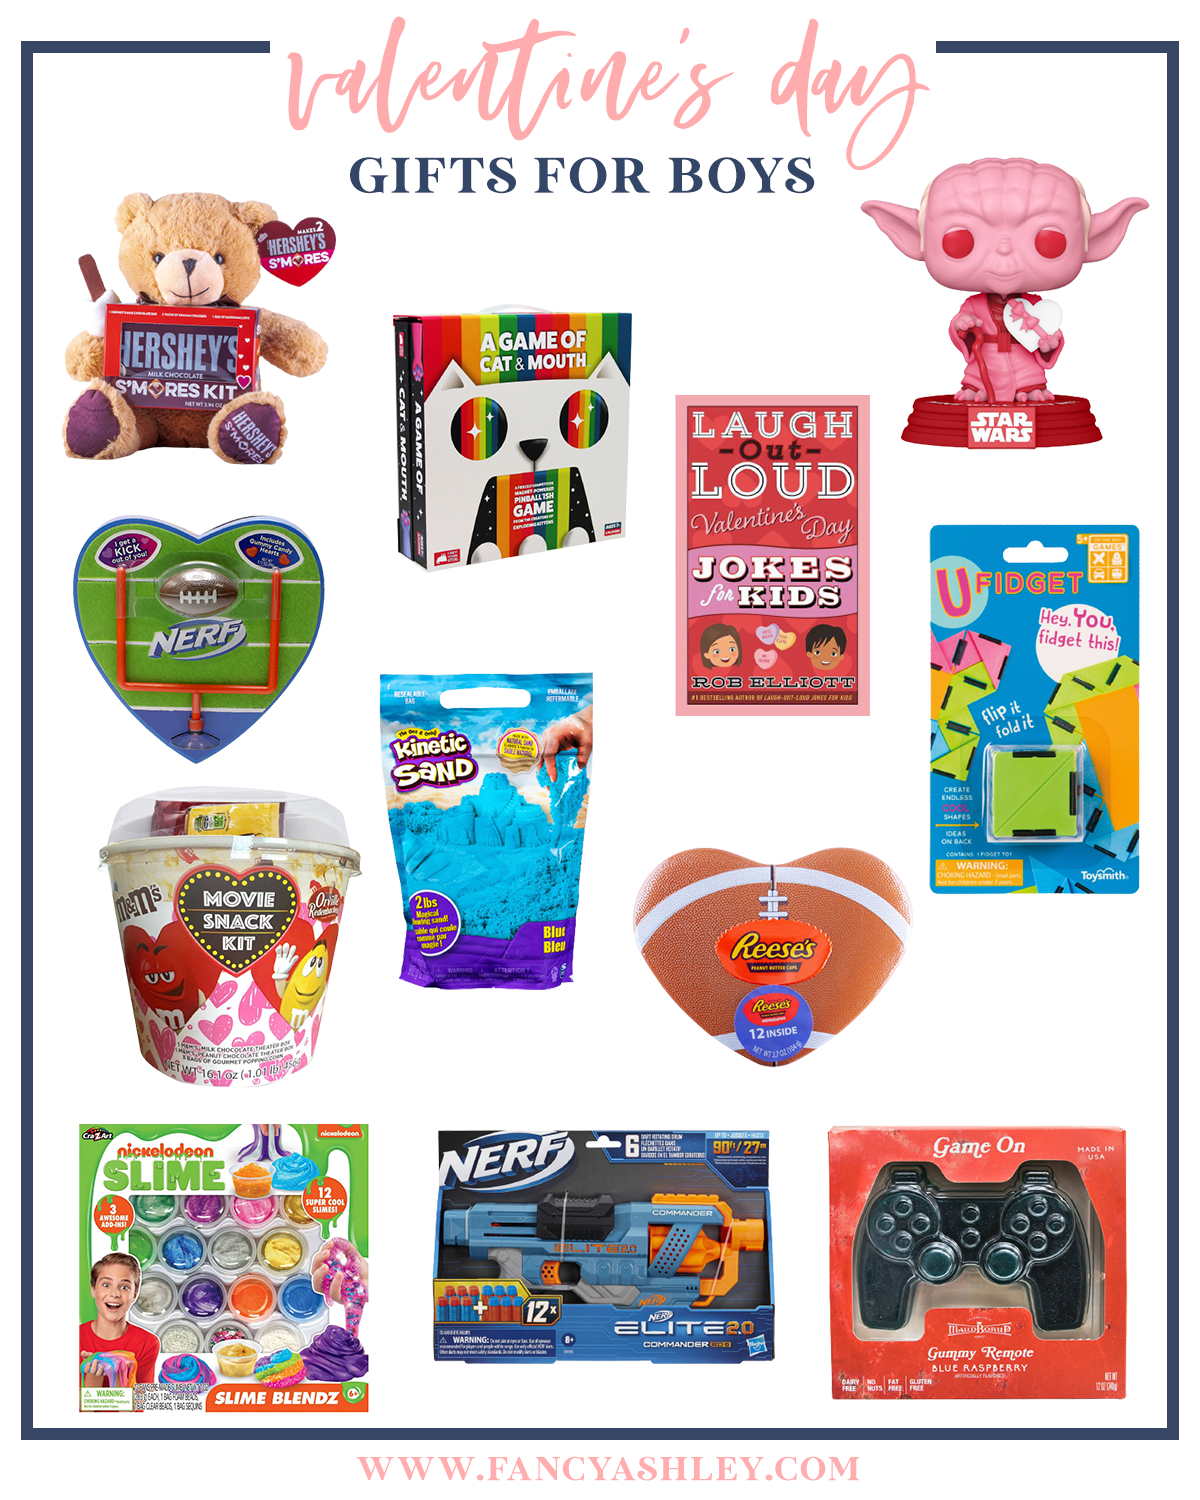 Valentine's Day Gift Ideas for Kids by popular Houston life and style blog, Fancy Ashley: collage image of a a stuffed Hershey bear, Laugh out Loud jokes for kids, gummy game controller, slime kit, Nerf gun, A Game of Cat and Mouth, mini Nerf football set, M&M's movie snack kit, kinetic sand, Yoda bobble head, U fidget, and Reese's heart shaped football candy.